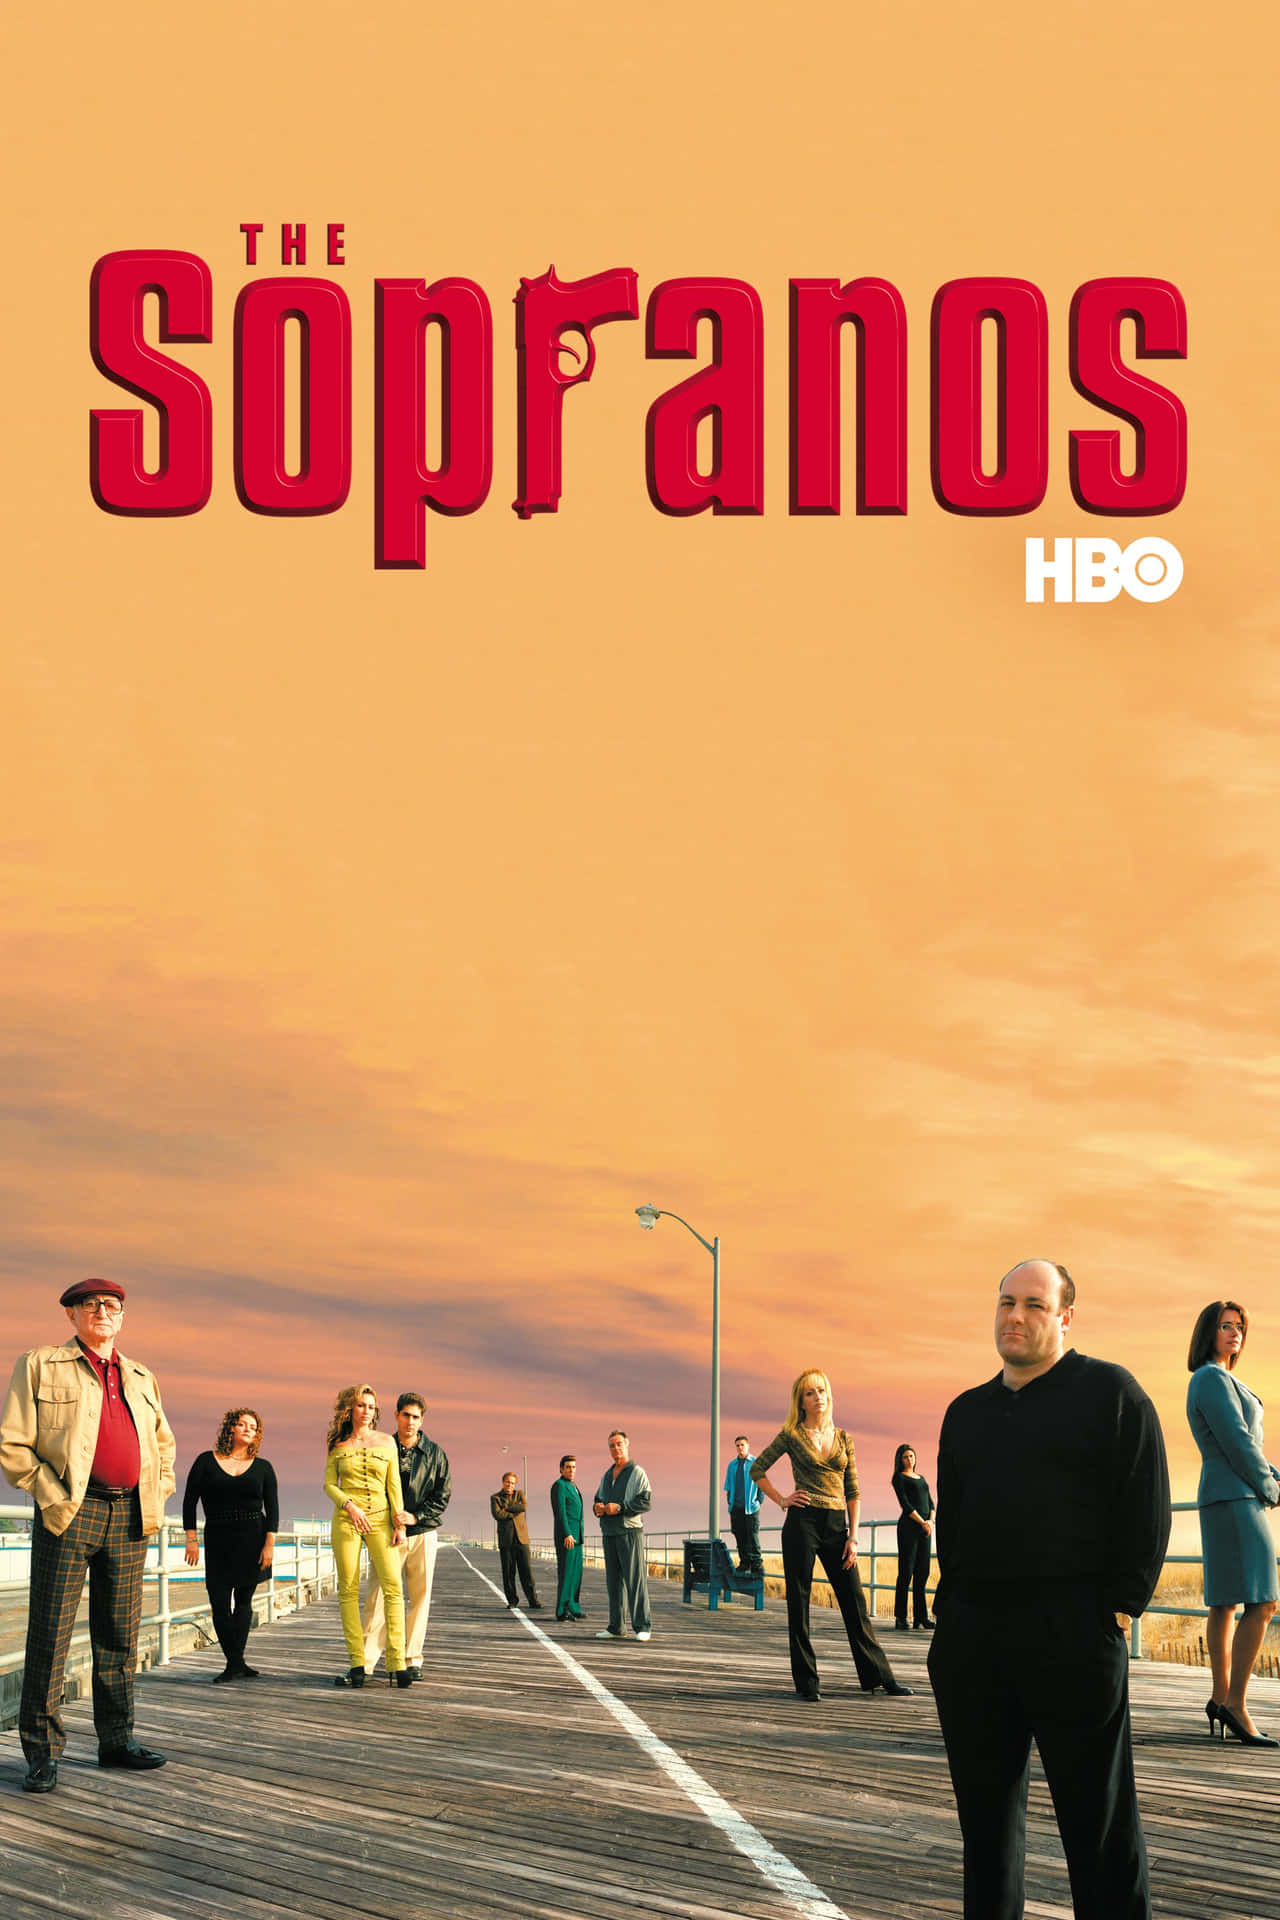 The Sopranos phone wallpaper 1080P 2k 4k Full HD Wallpapers Backgrounds  Free Download  Wallpaper Crafter